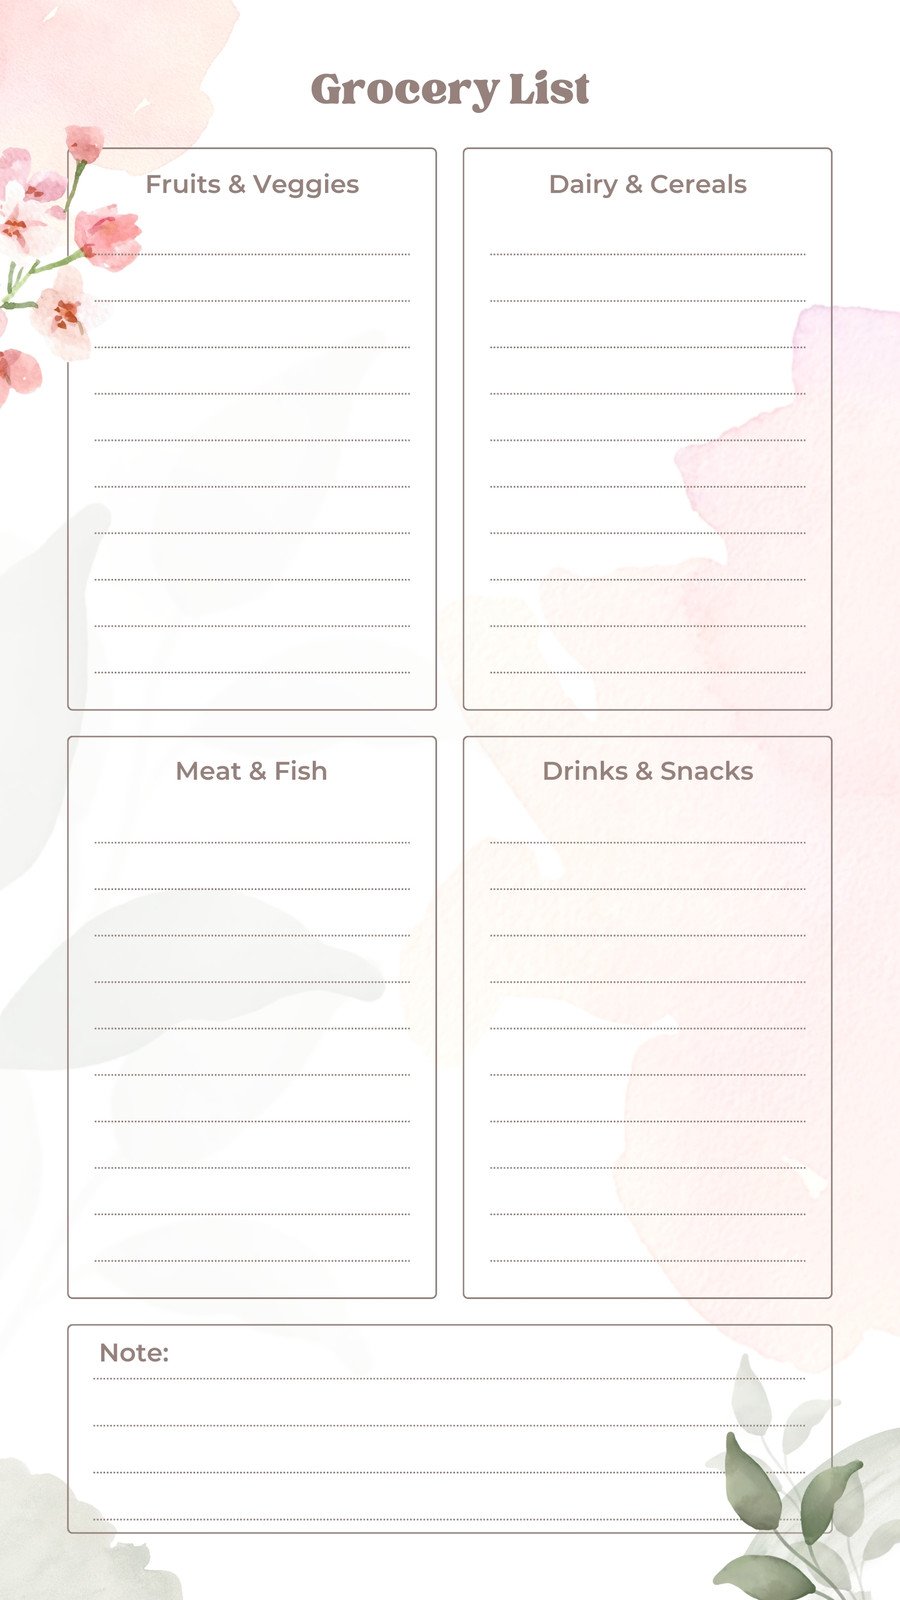 Use Our Printable Grocery List for a More Efficient Shopping Trip